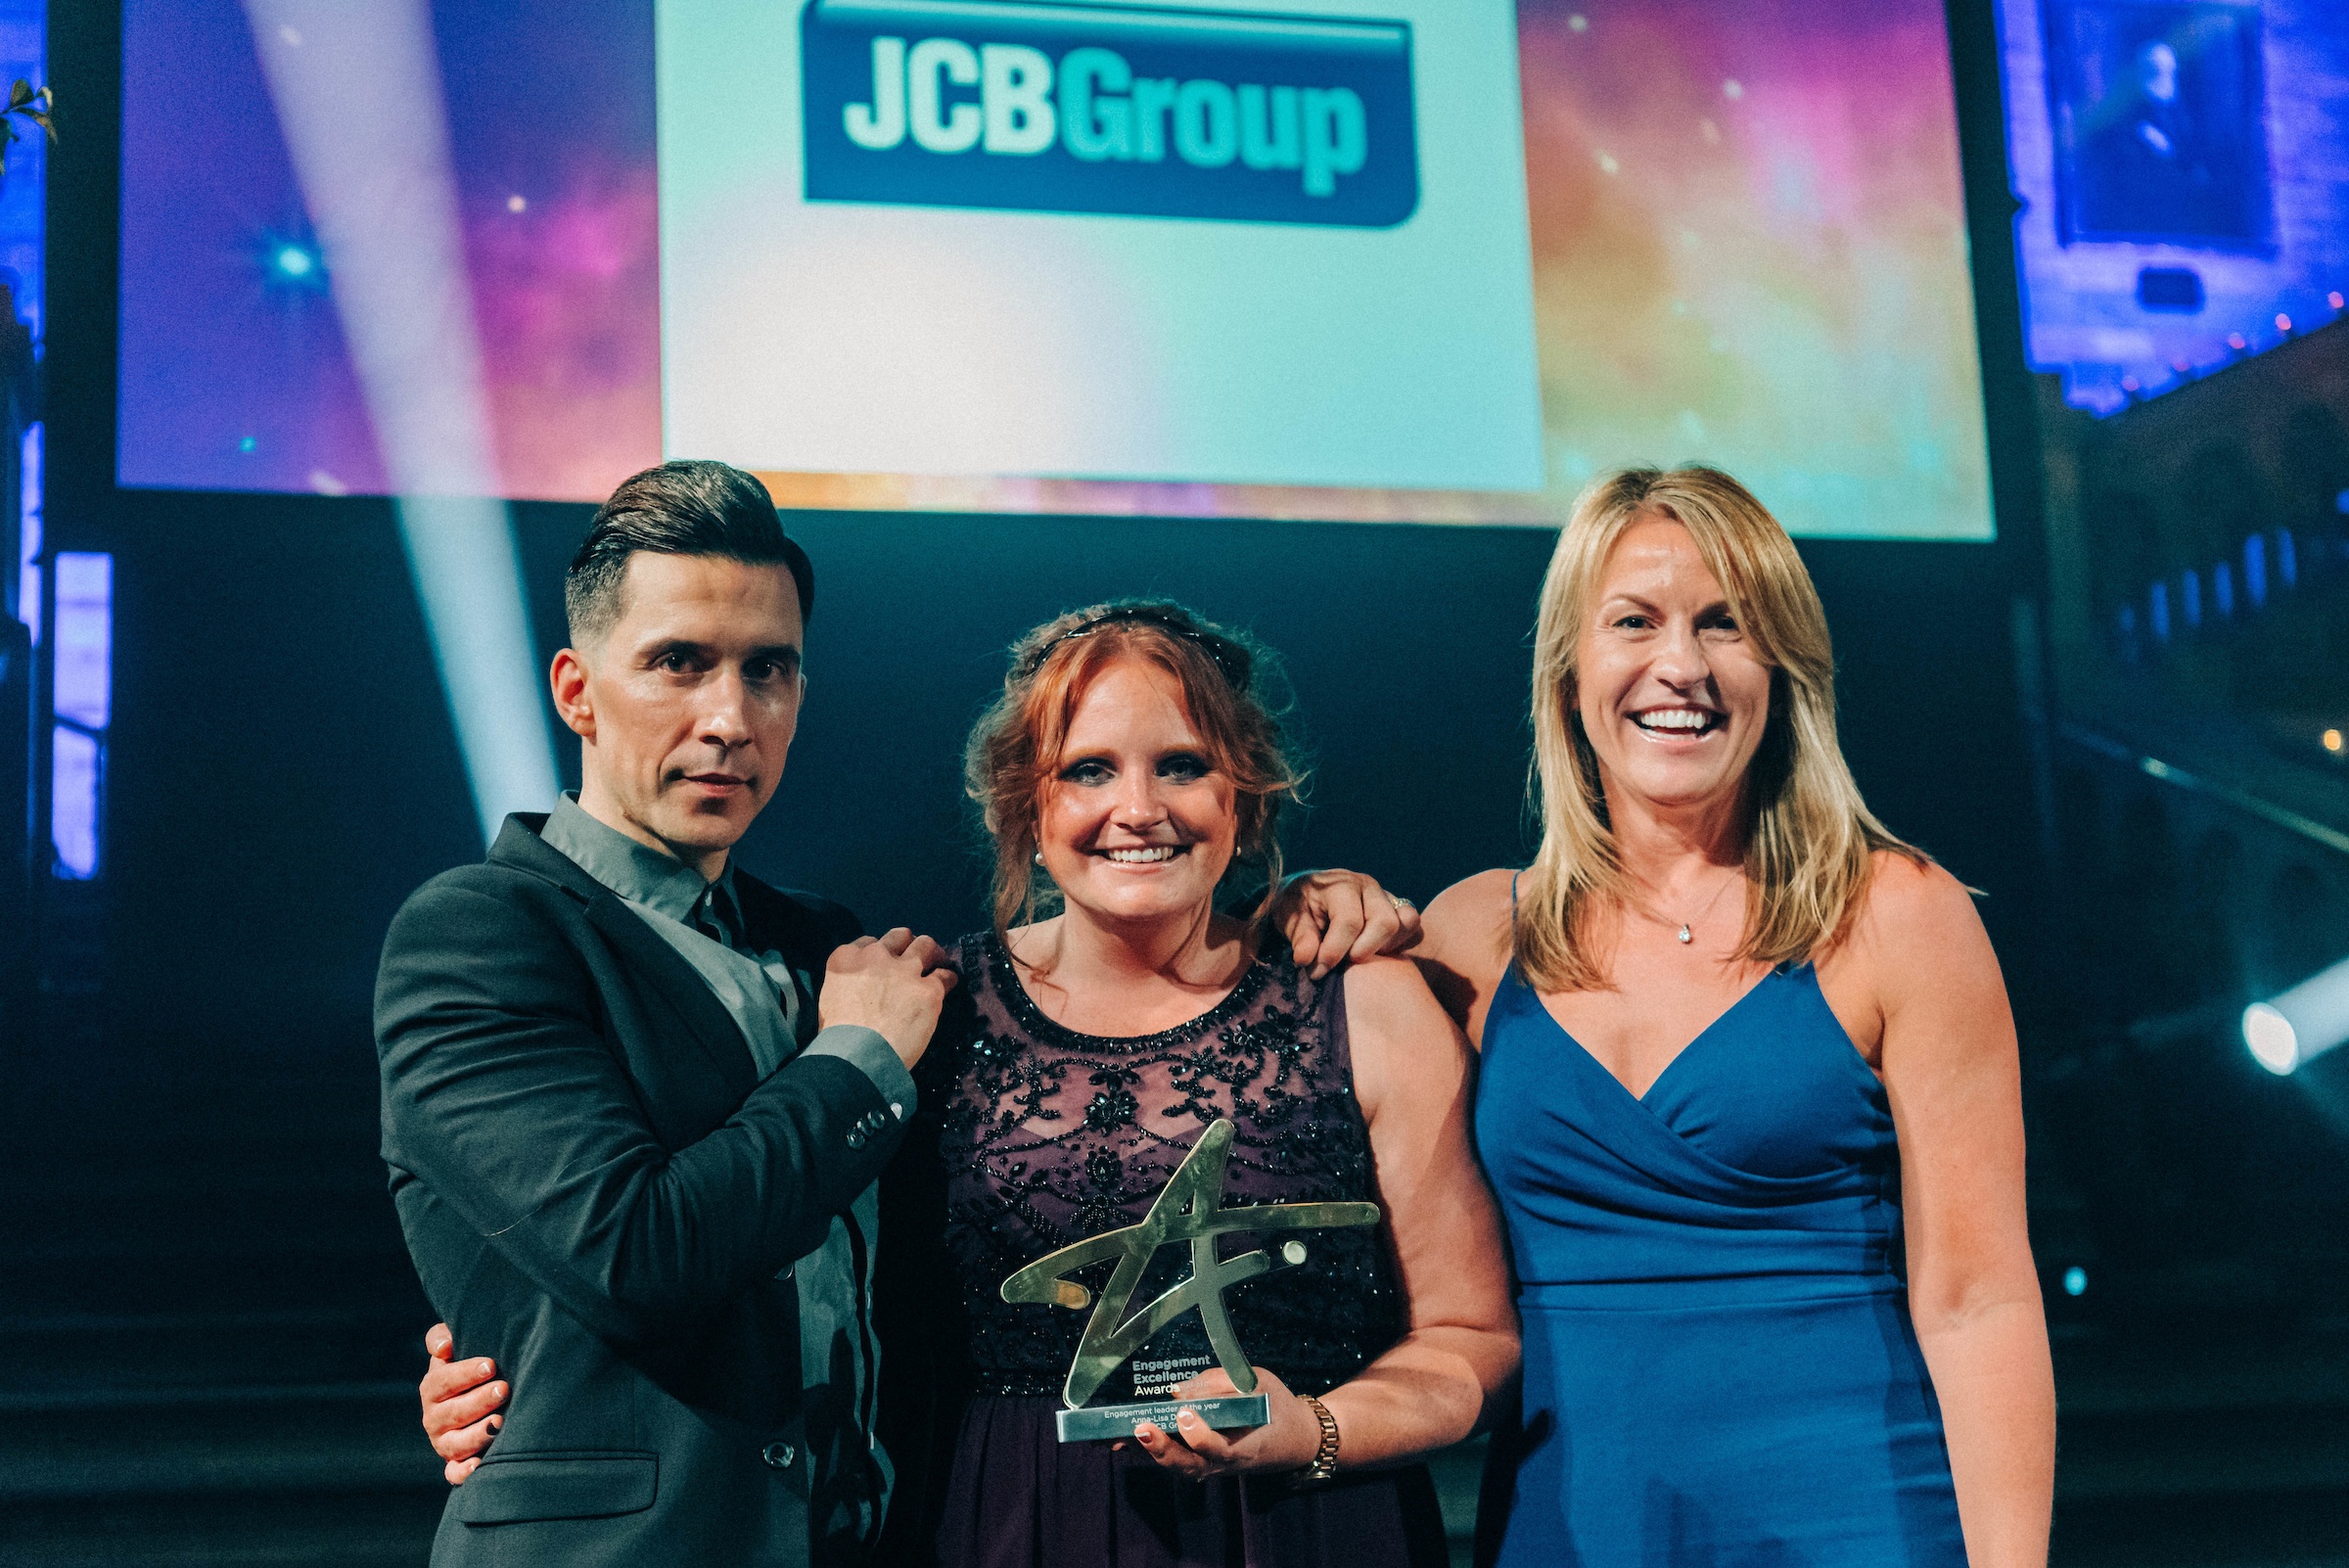 JCB_Group_-_Engagement_leader_of_the_year